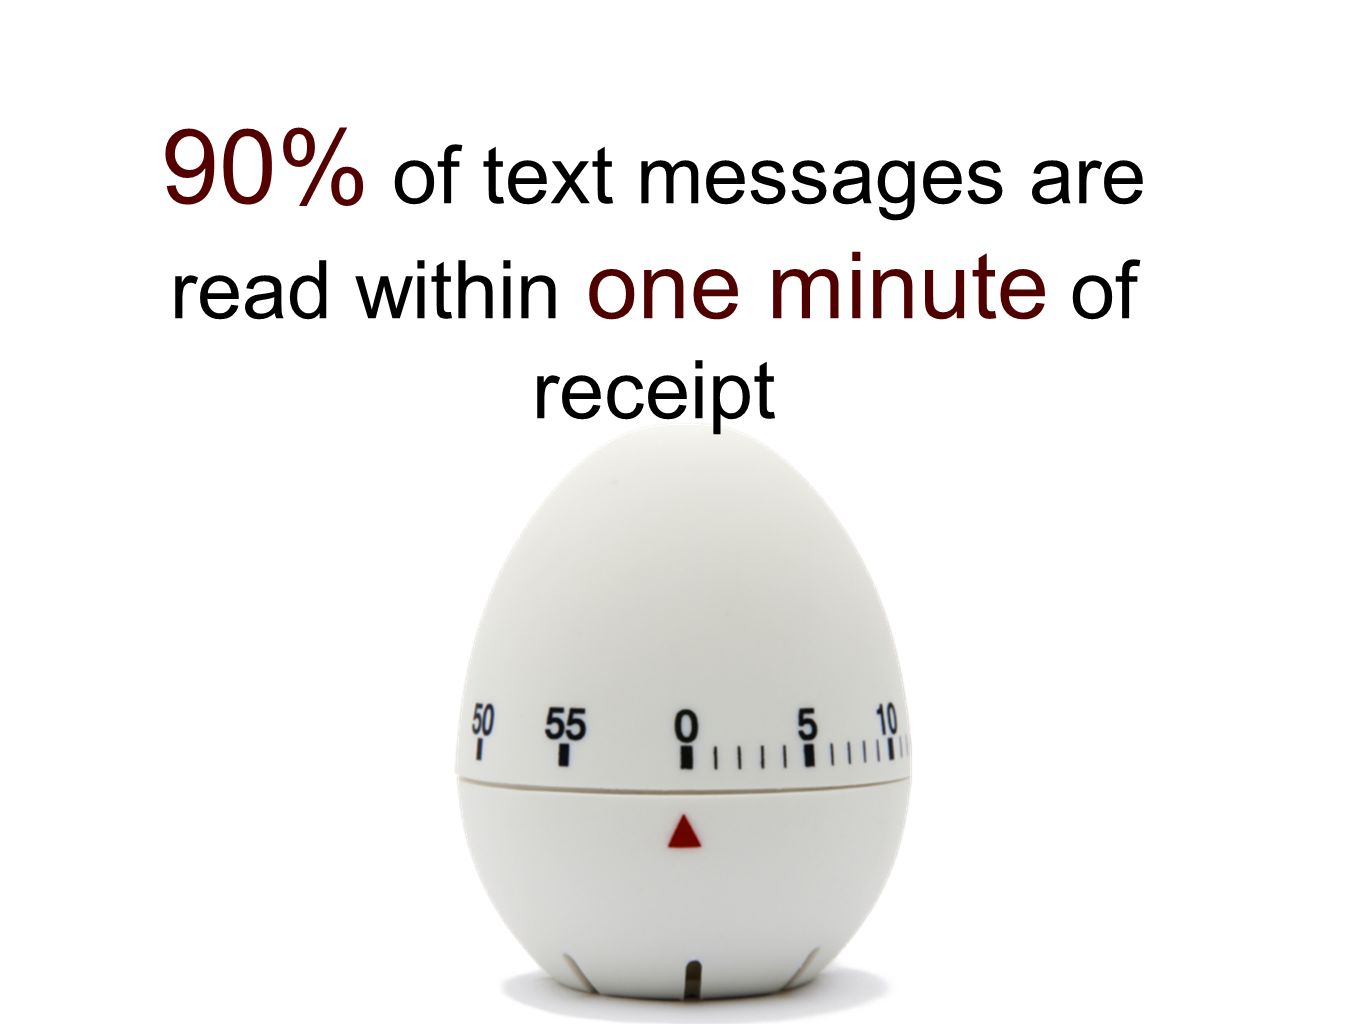 90% of text messages are read within one minute of receipt